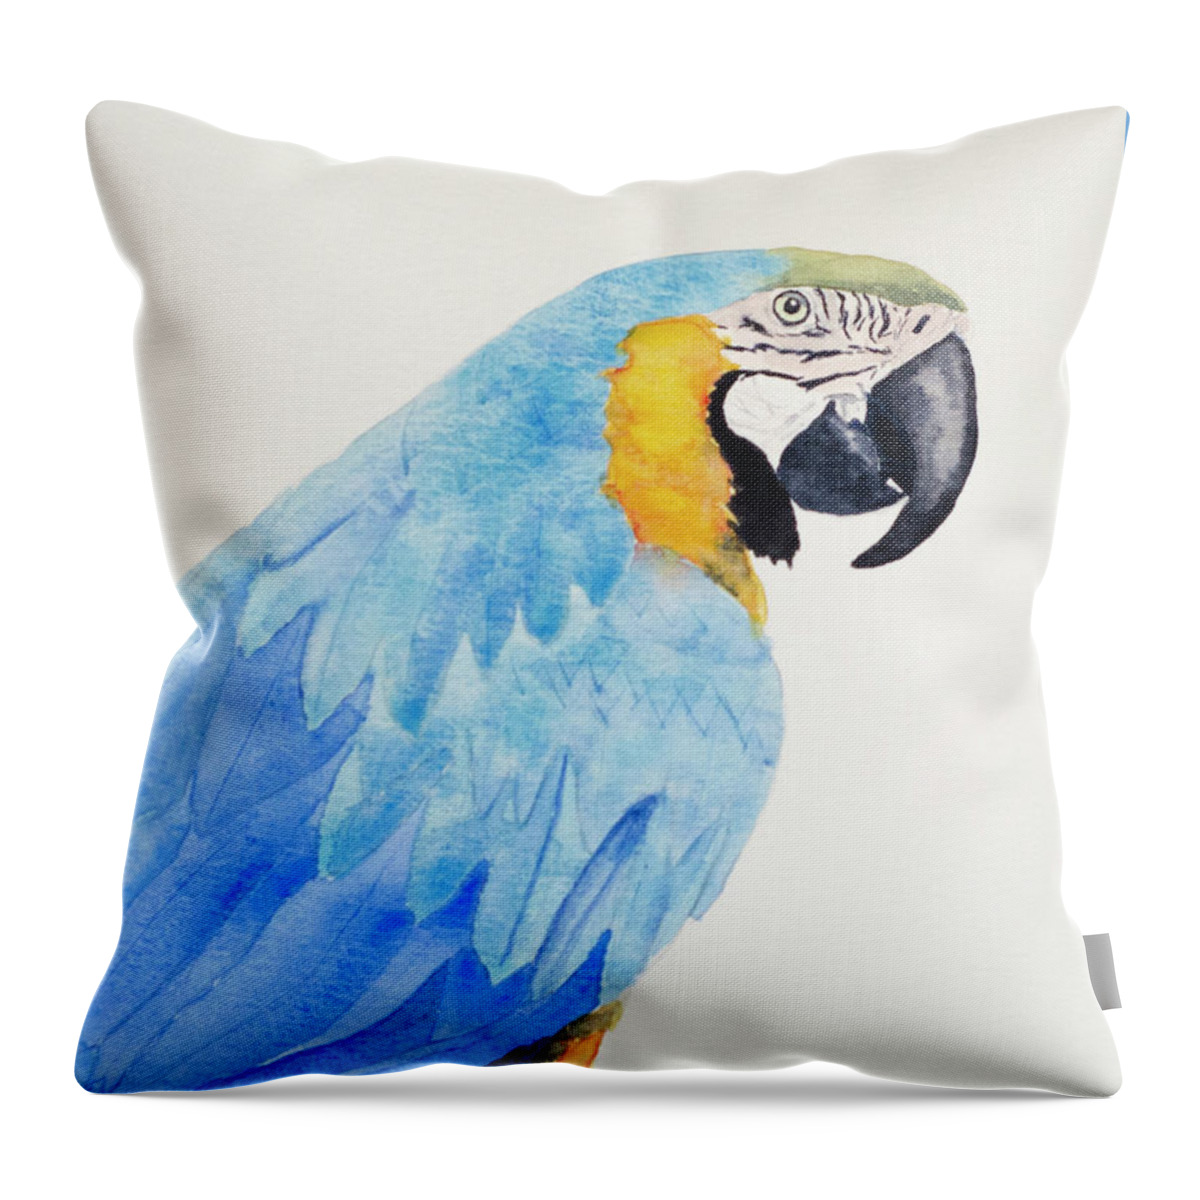 Polly Throw Pillow featuring the painting Polly by Laurel Best